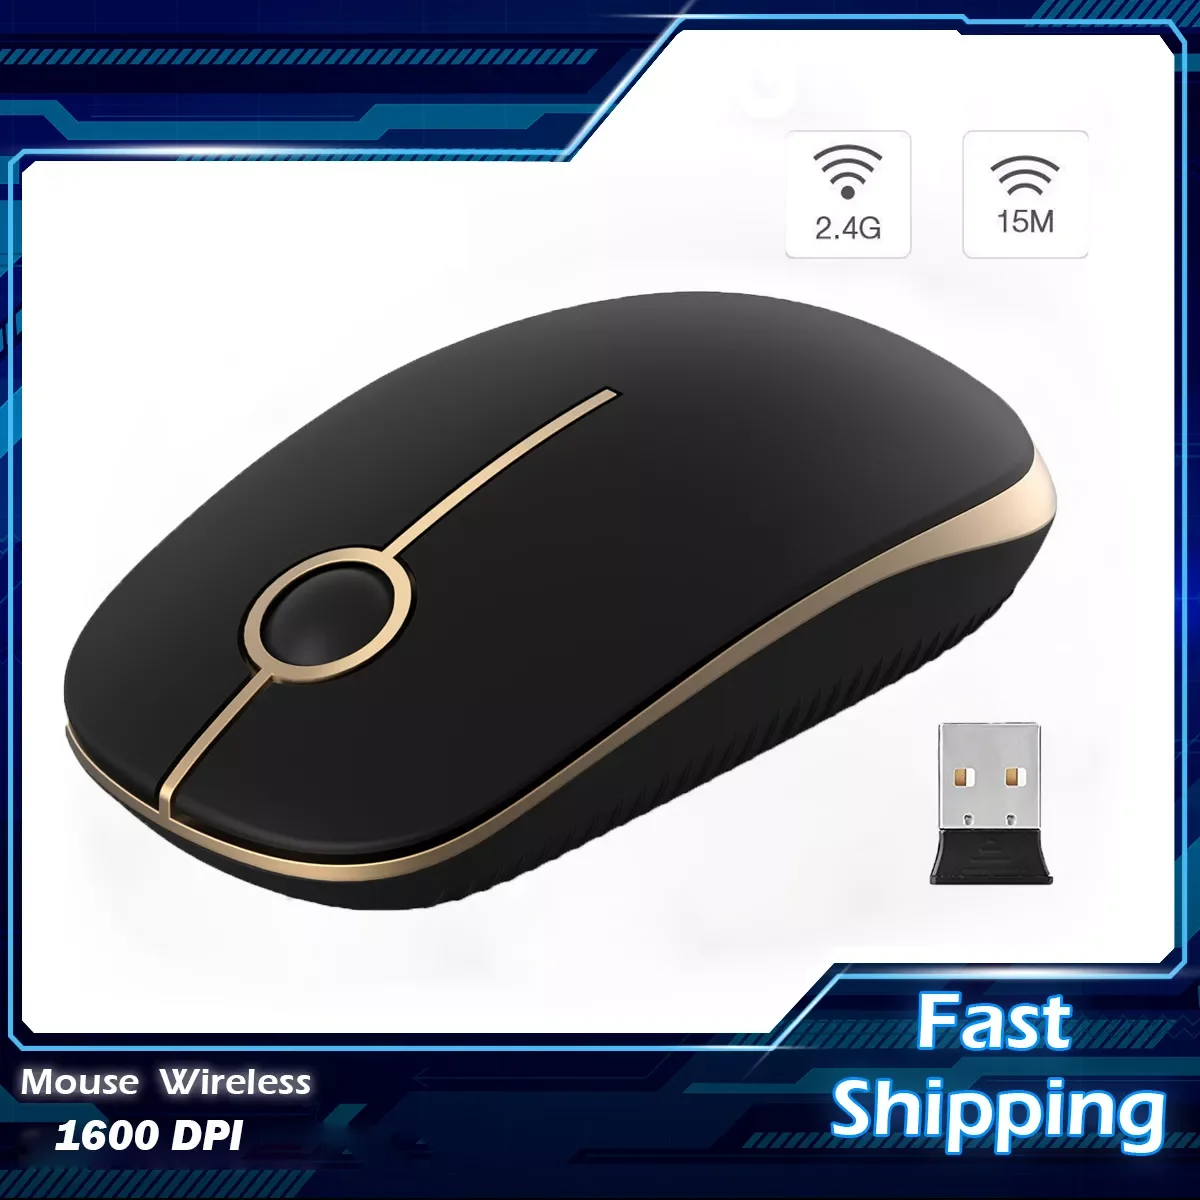 

Jelly Comb 2.4G Slim Mouse Wireless with Nano Receiver Portable Optical Noiseless Mice for Notebook PC Laptop Computer MacBook